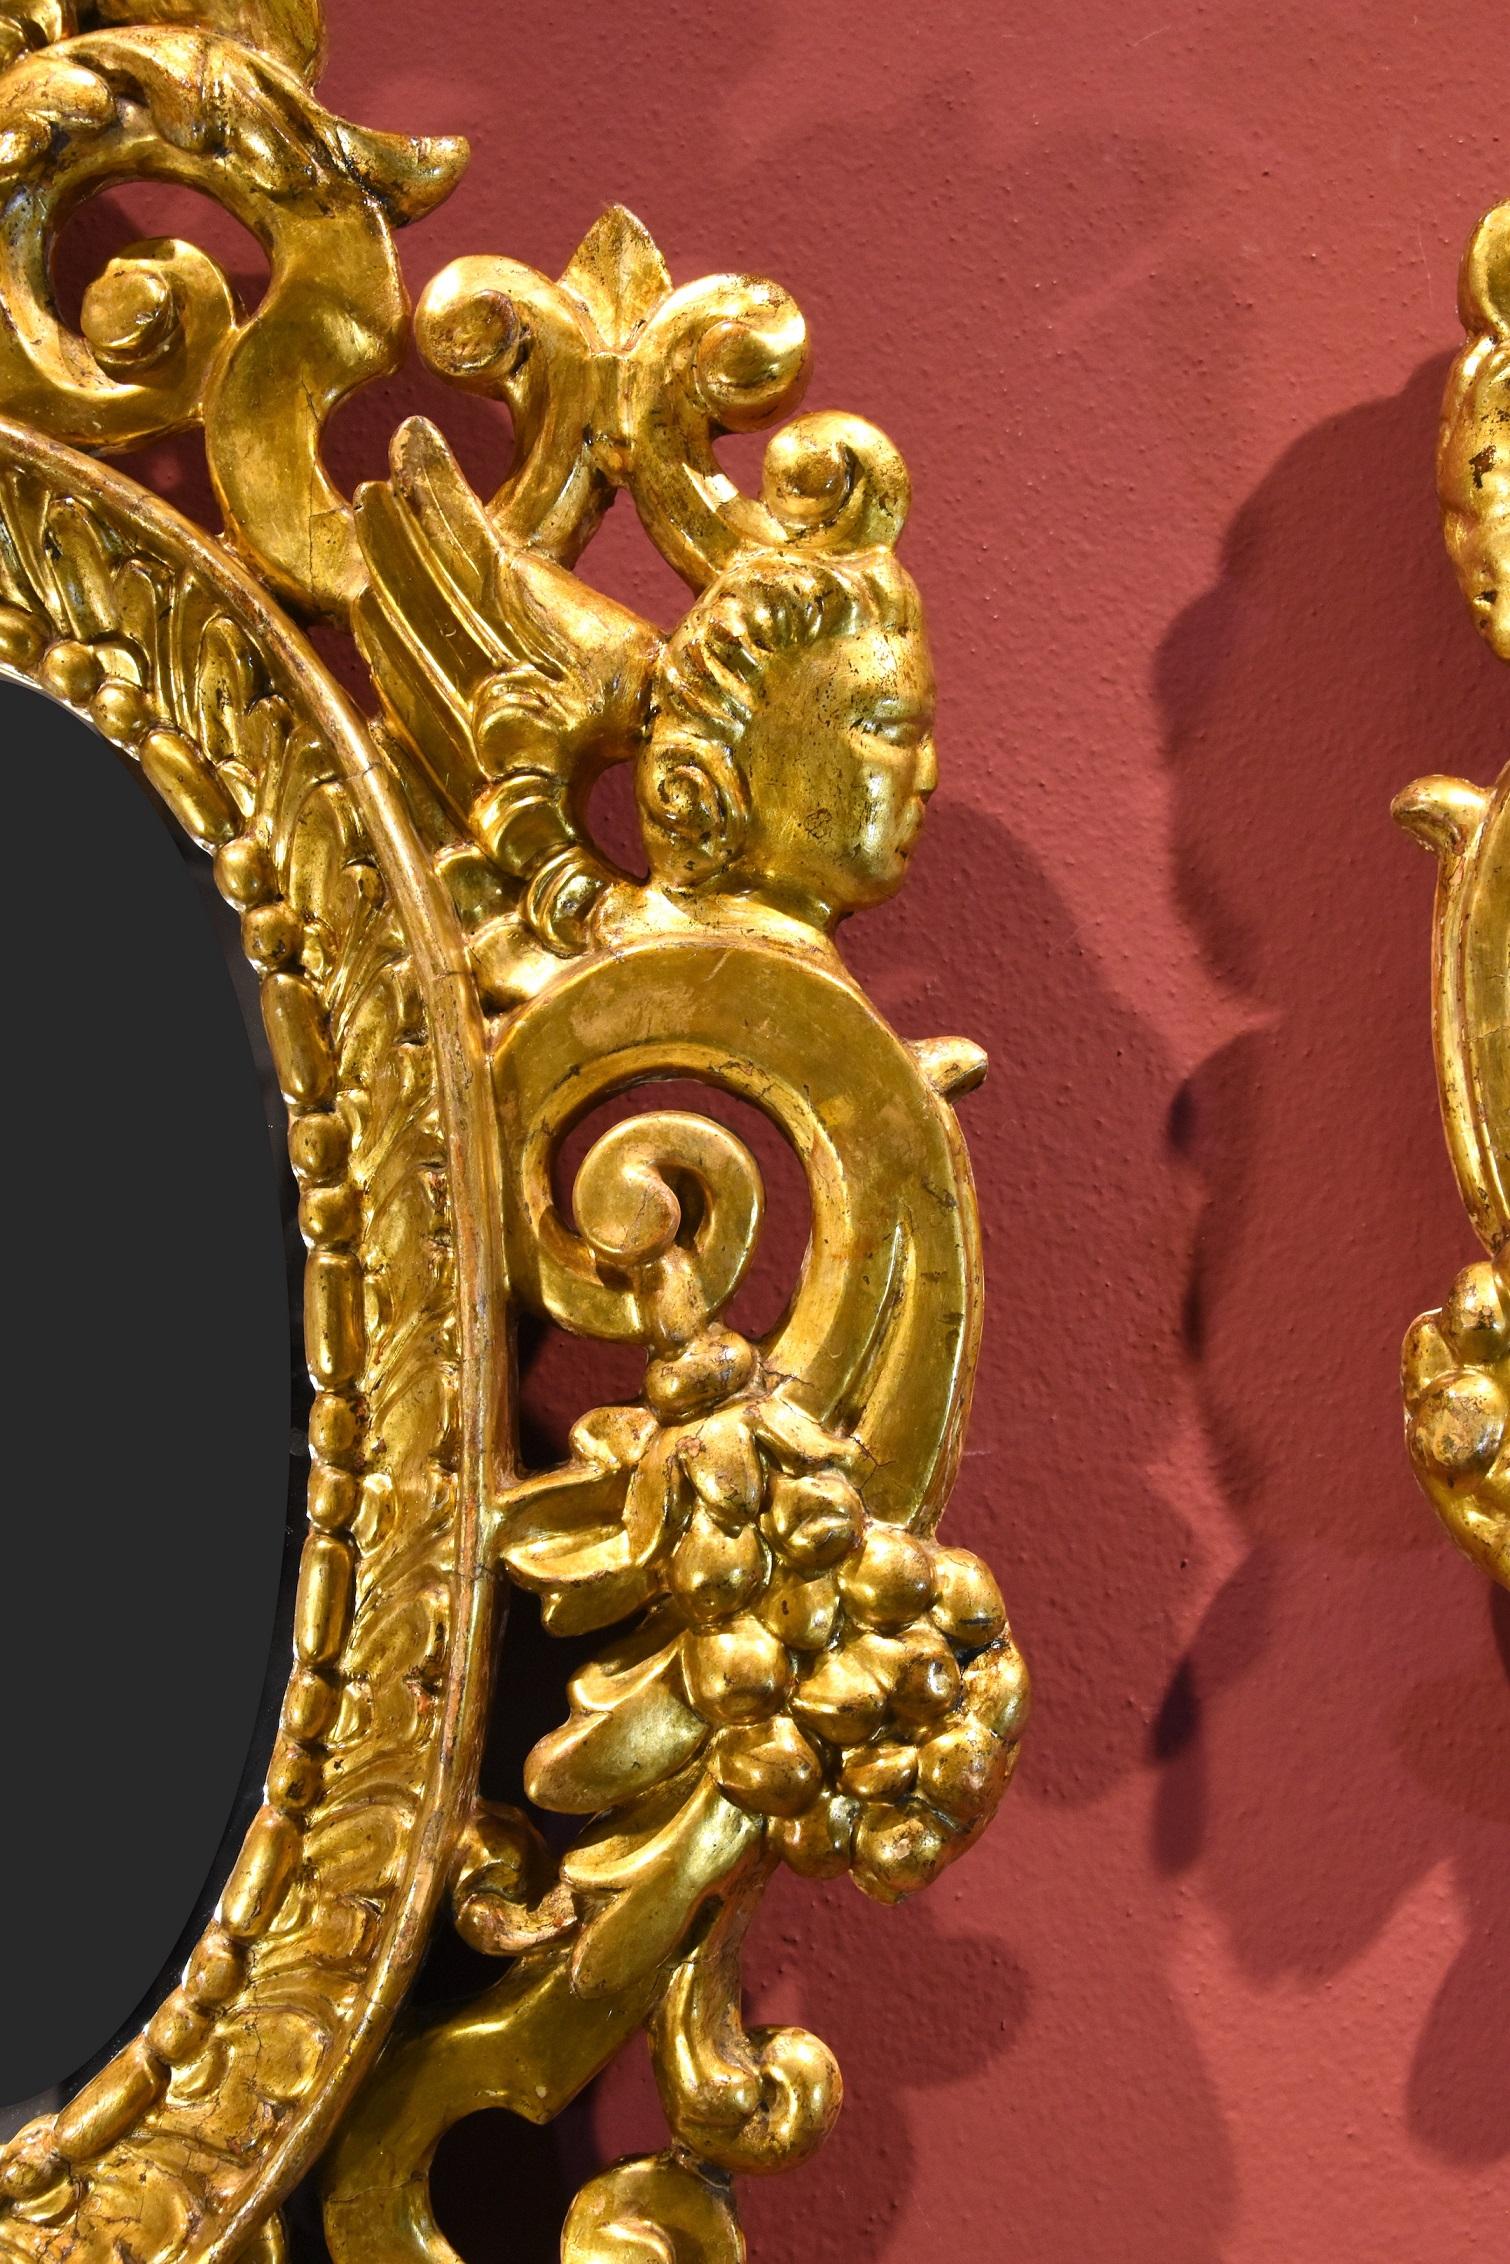 Pair Carved Gilded Mirrors Gold Wood Venice 18th Century Italy Quality Baroque For Sale 7